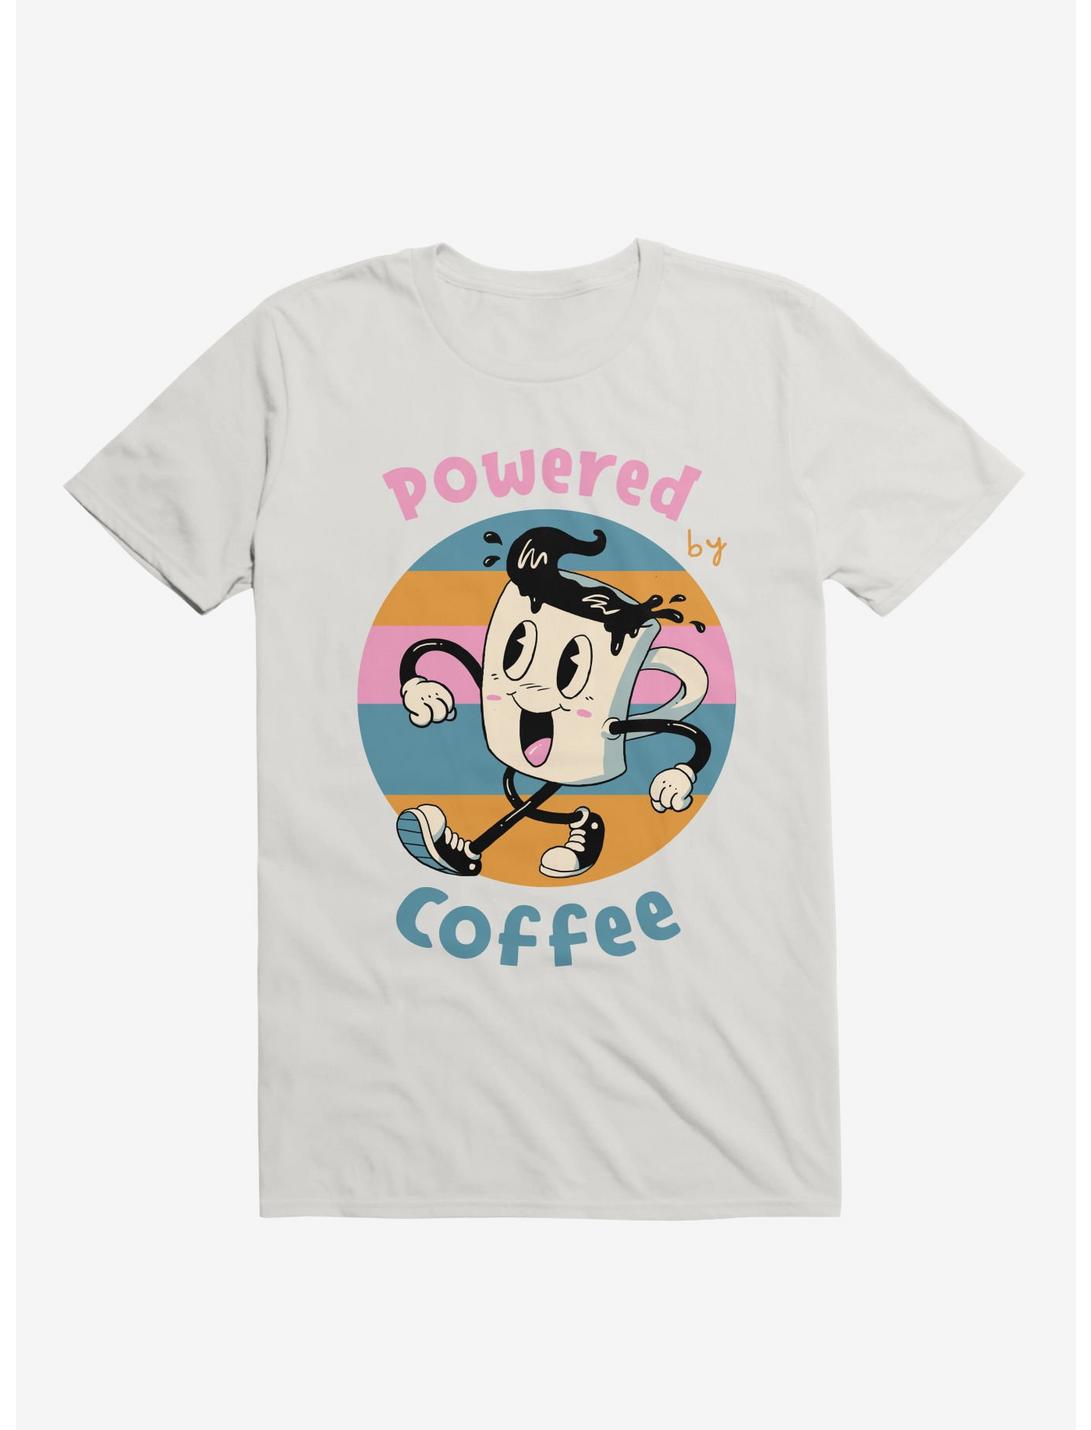 Powered By Coffee White T-Shirt, WHITE, hi-res